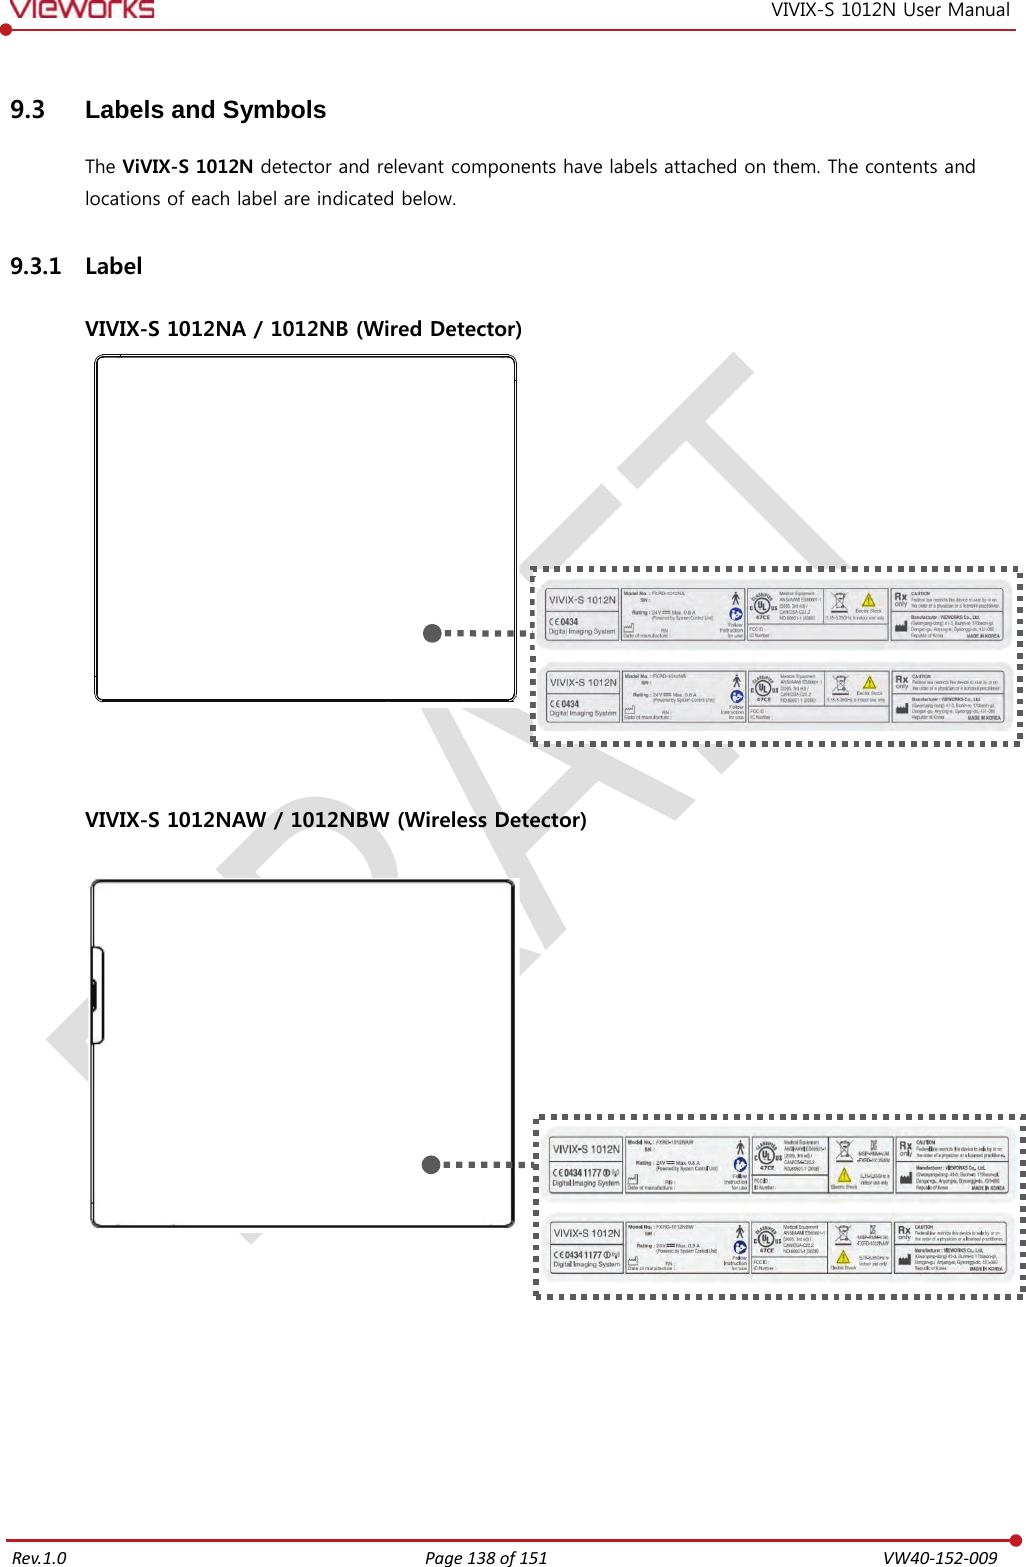   Rev.1.0 Page 138 of 151  VW40-152-009 VIVIX-S 1012N User Manual 9.3 Labels and Symbols The ViVIX-S 1012N detector and relevant components have labels attached on them. The contents and locations of each label are indicated below. 9.3.1 Label  VIVIX-S 1012NA / 1012NB (Wired Detector)     VIVIX-S 1012NAW / 1012NBW (Wireless Detector)          